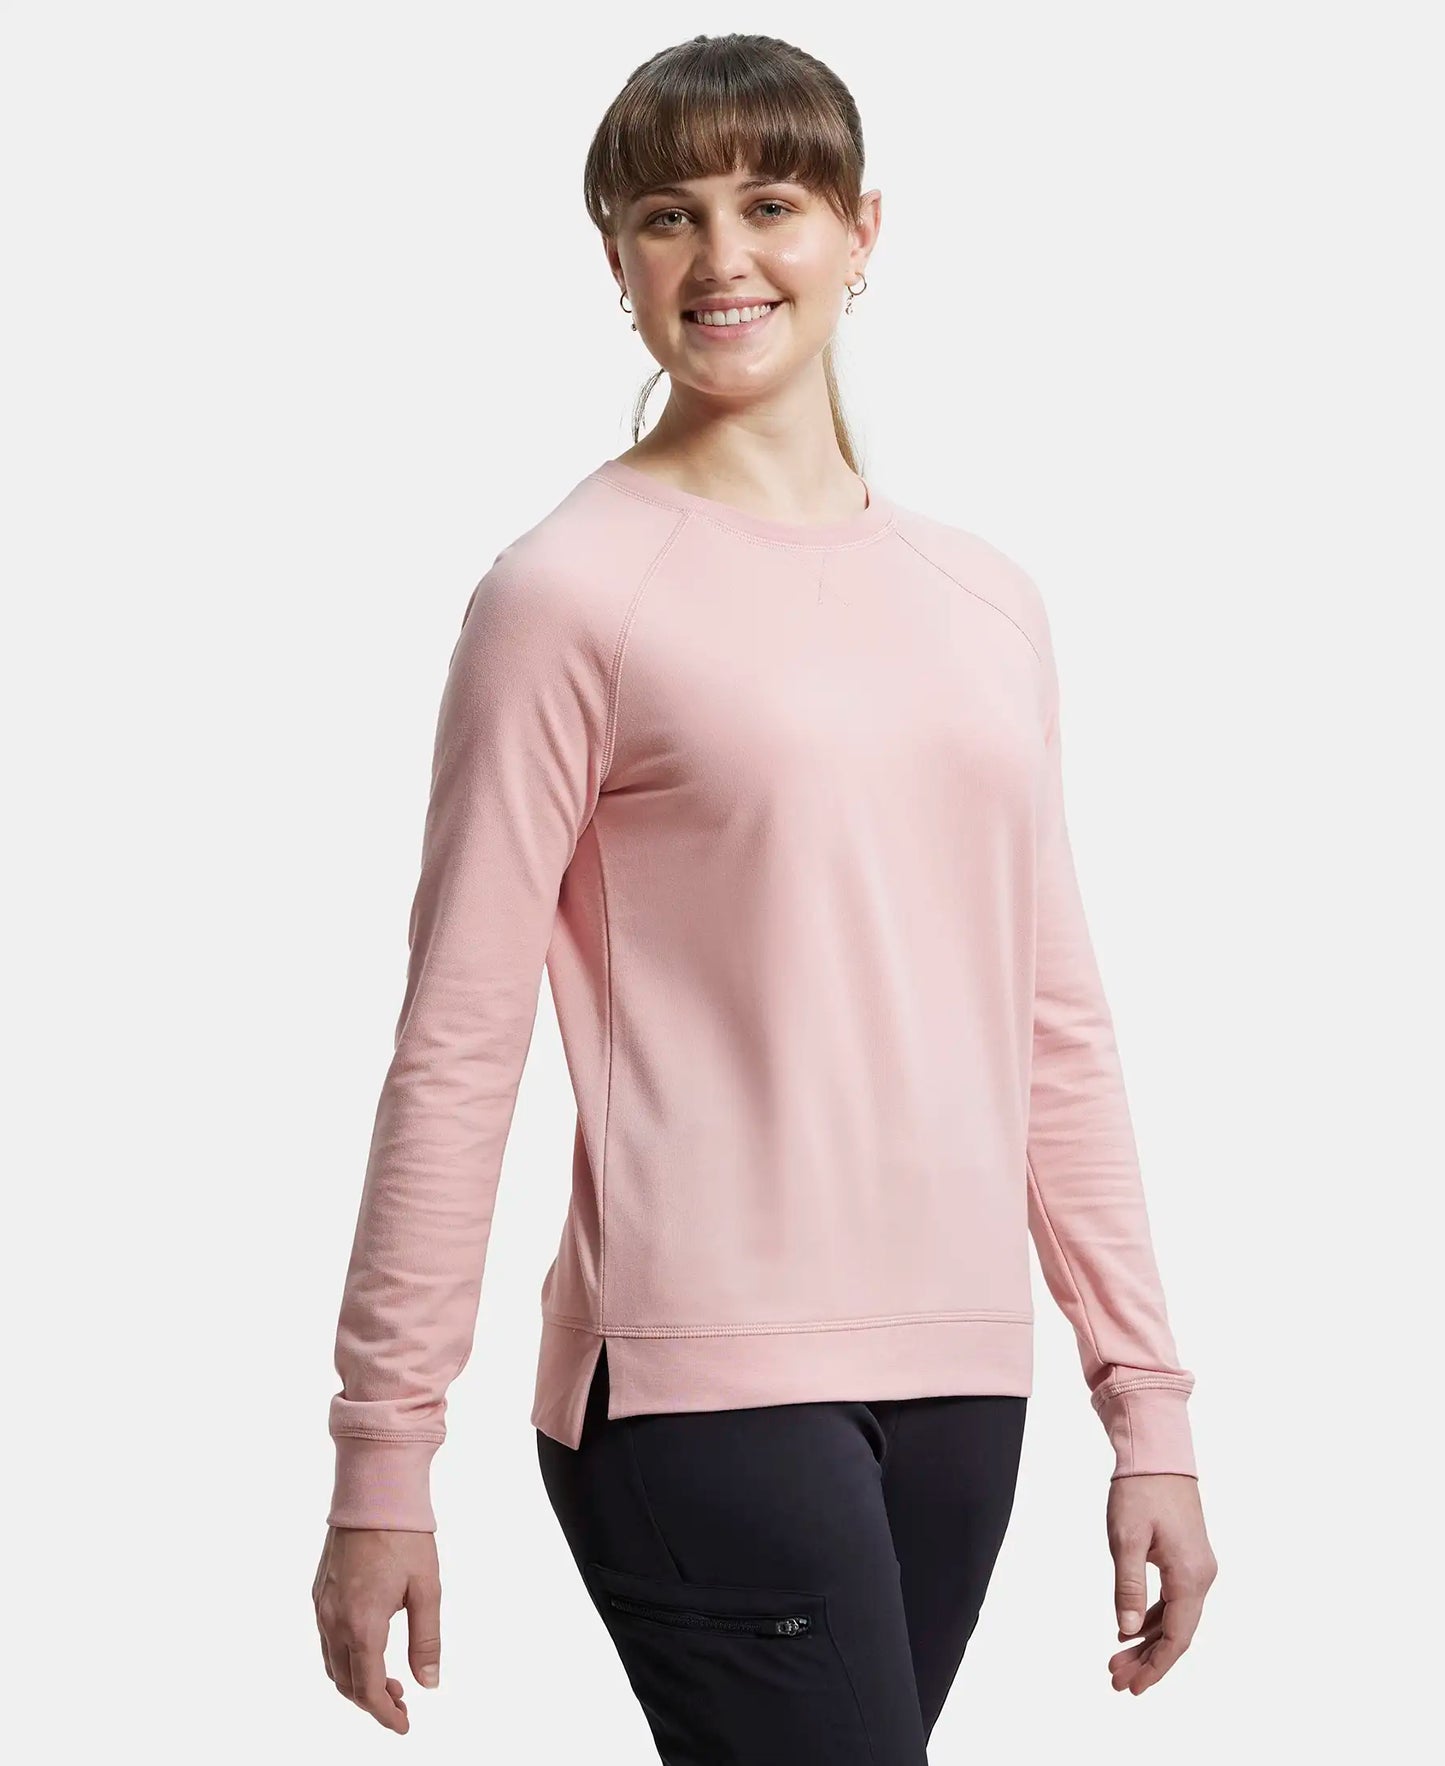 Super Combed Cotton Rich French Terry Fabric Solid Sweatshirt with Raglan Sleeve Styling - Blush-2